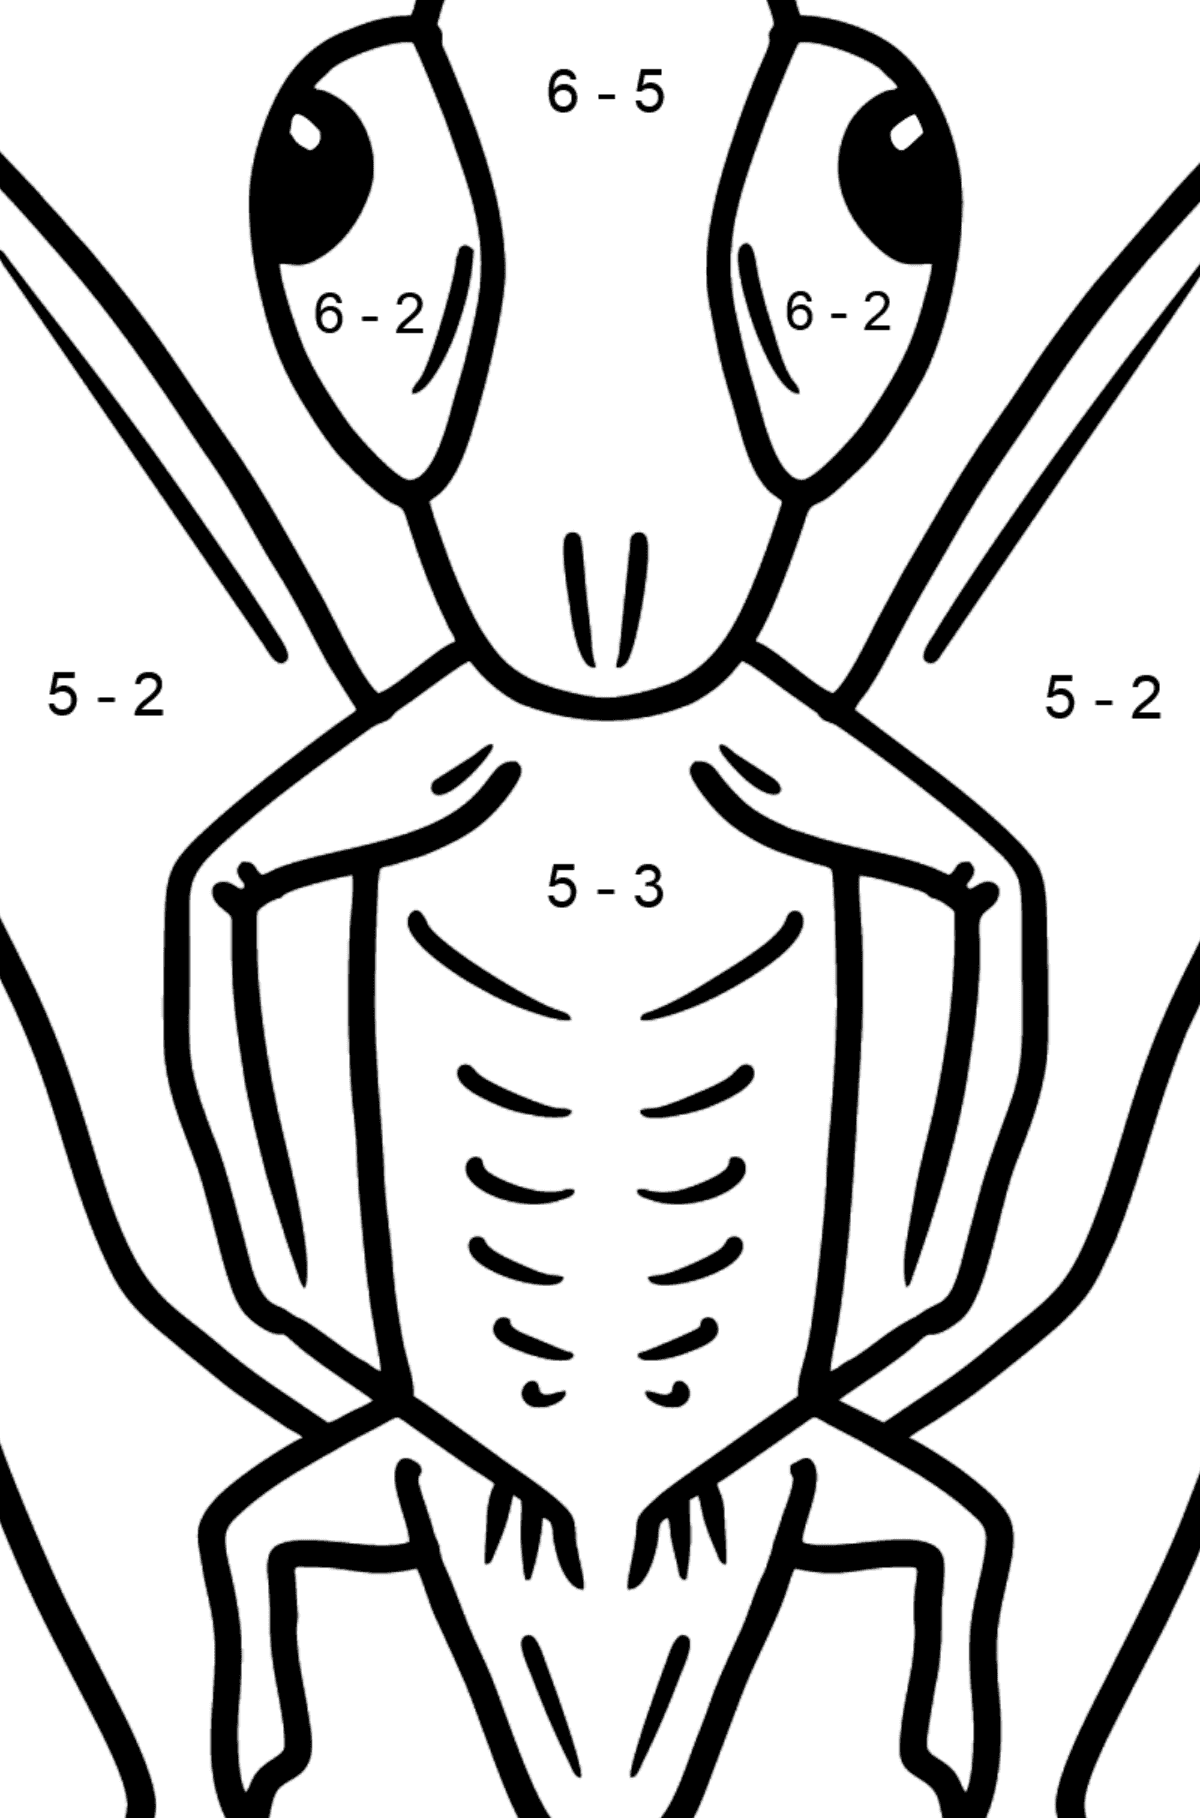 Grasshopper coloring page - Math Coloring - Subtraction for Kids